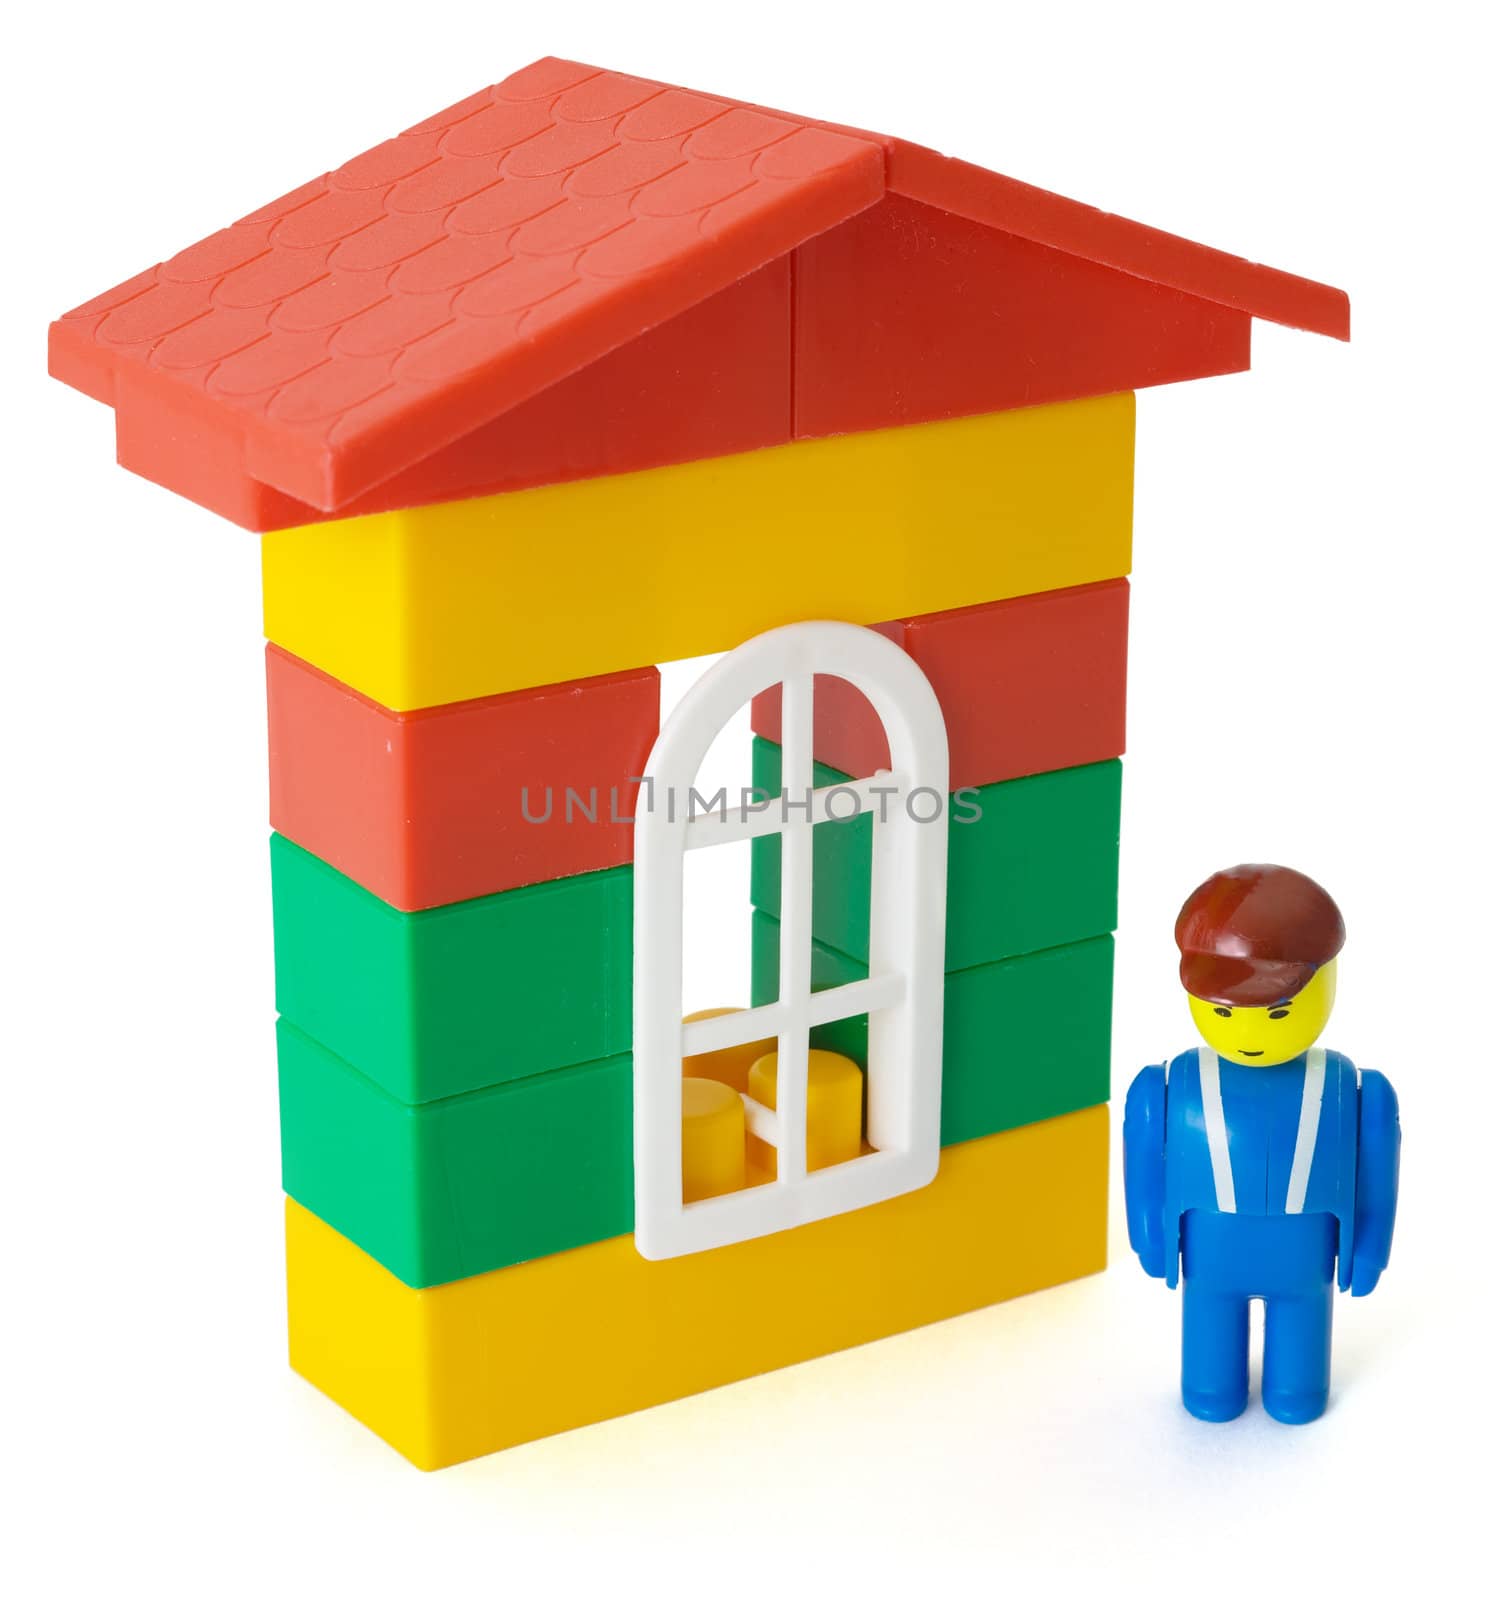 Toy plastic colored house and toy little man